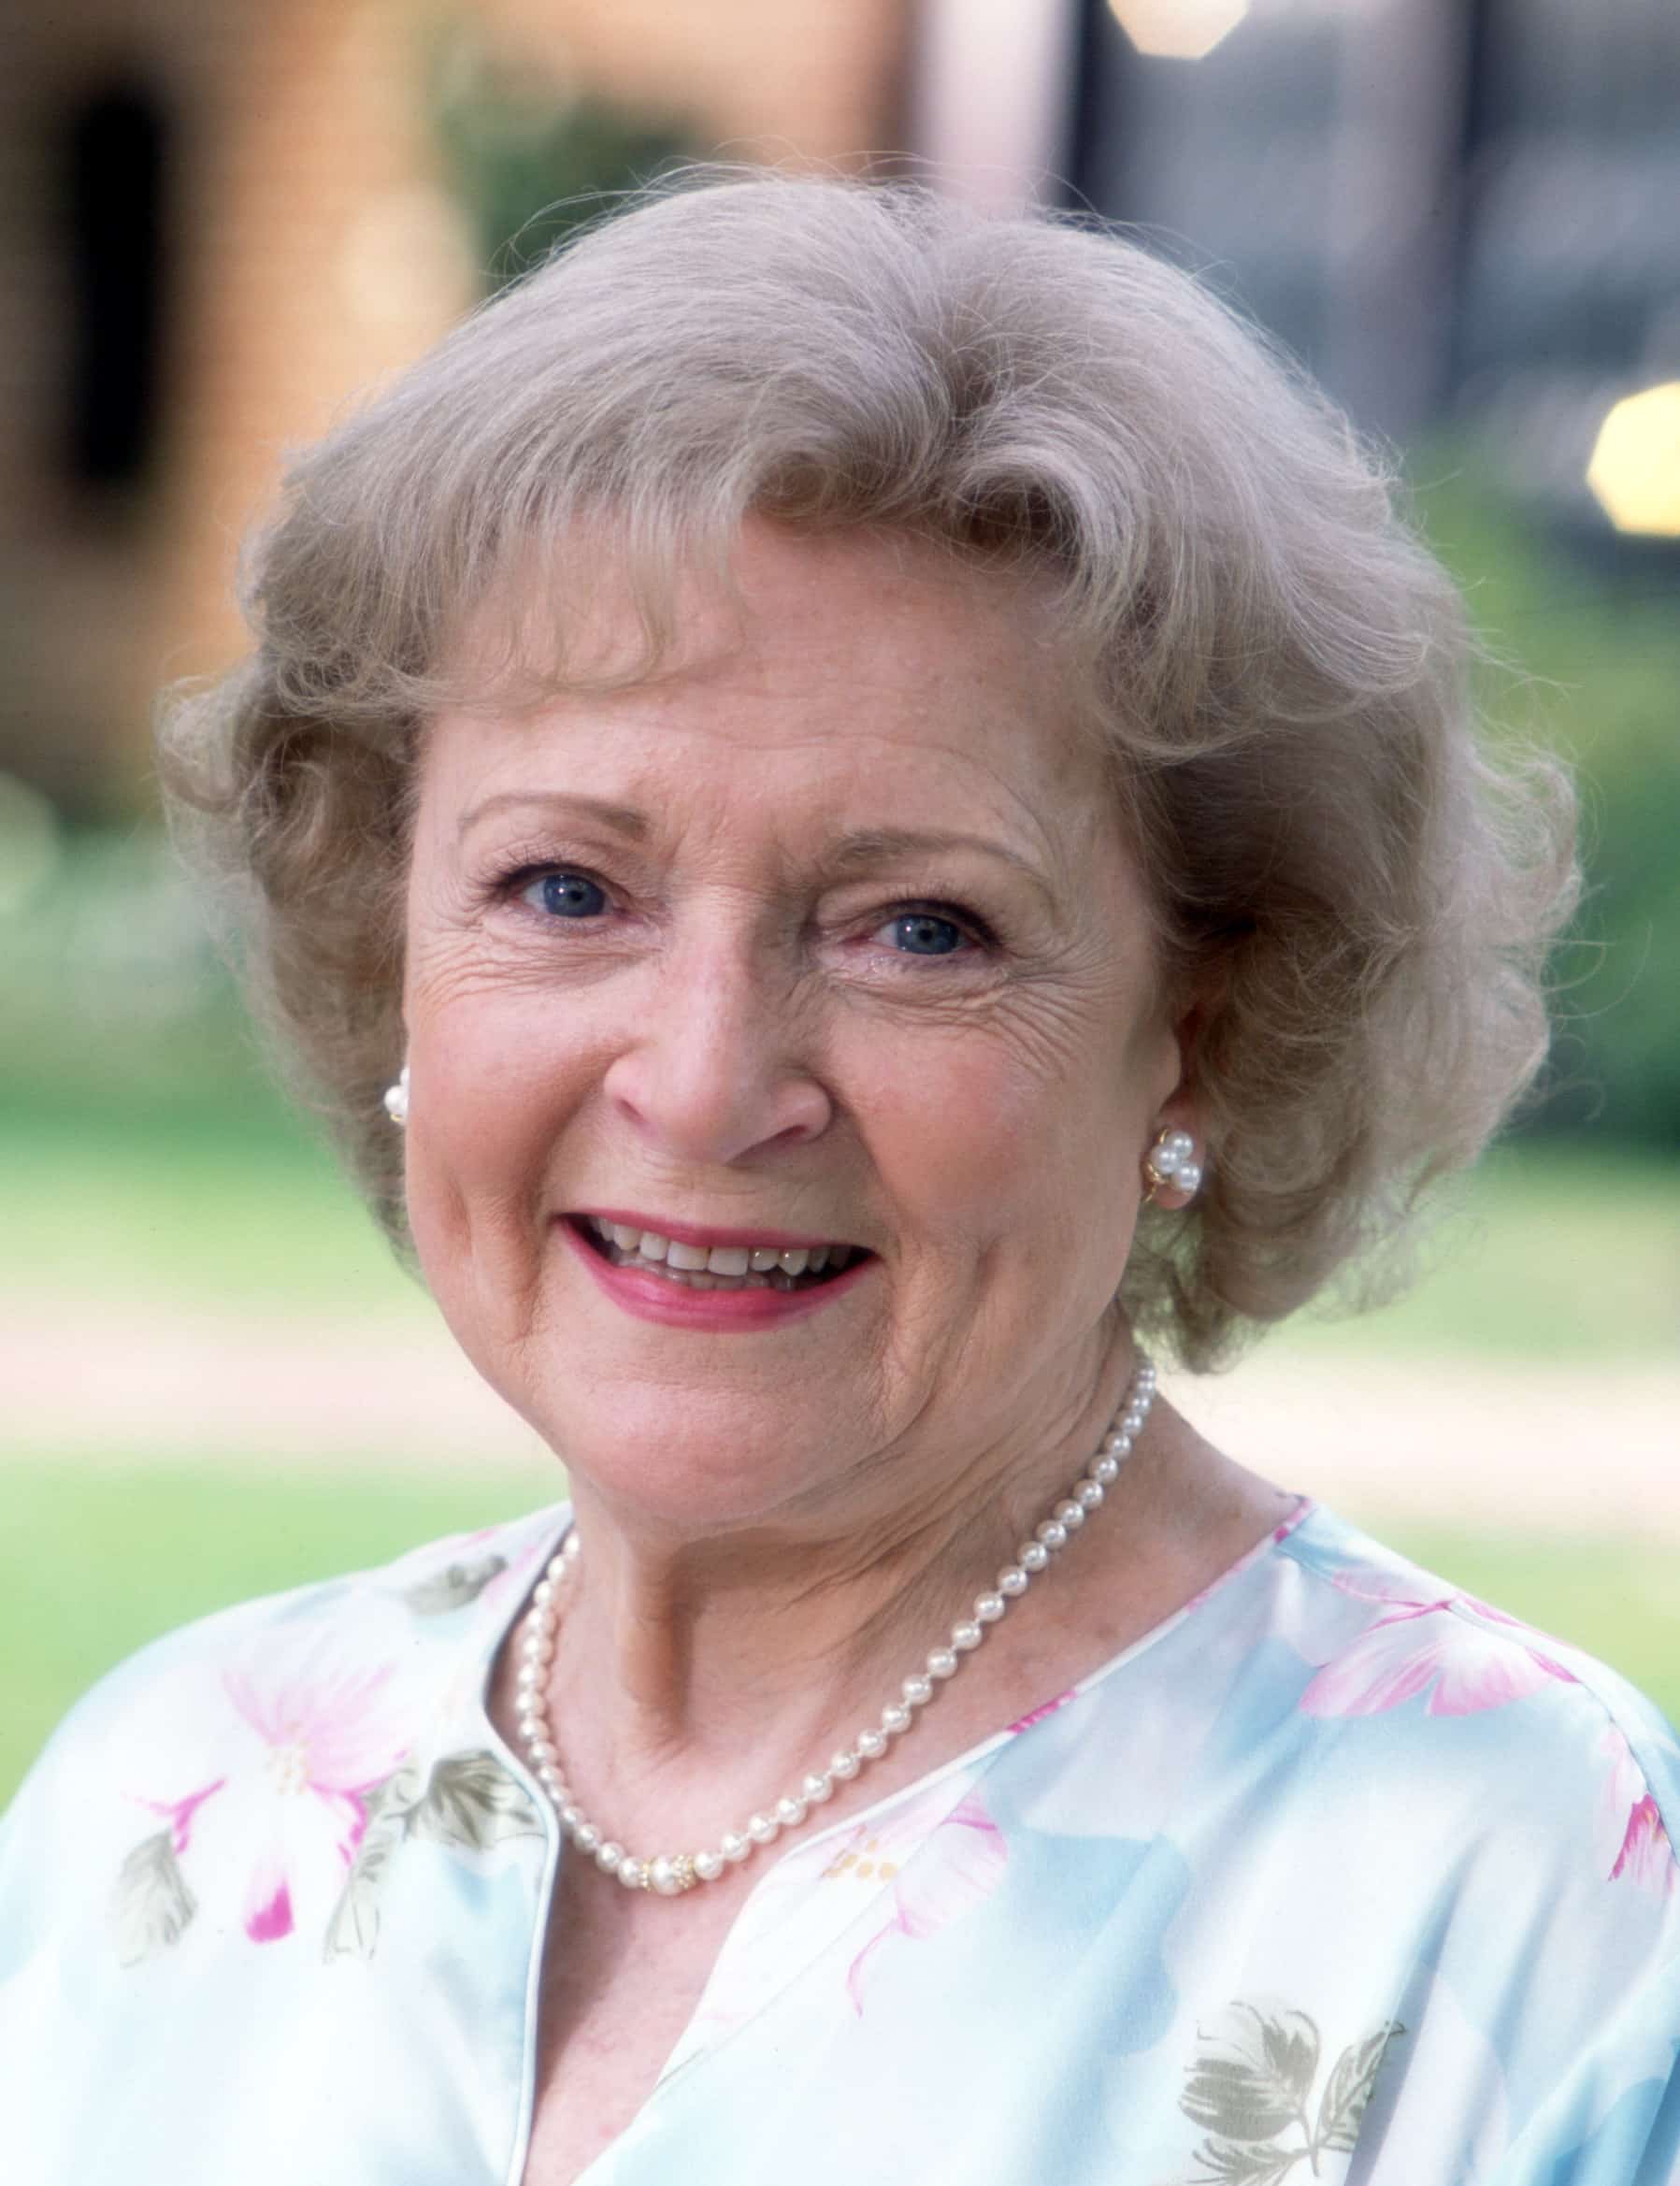 BRINGING DOWN THE HOUSE, Betty White, 2003